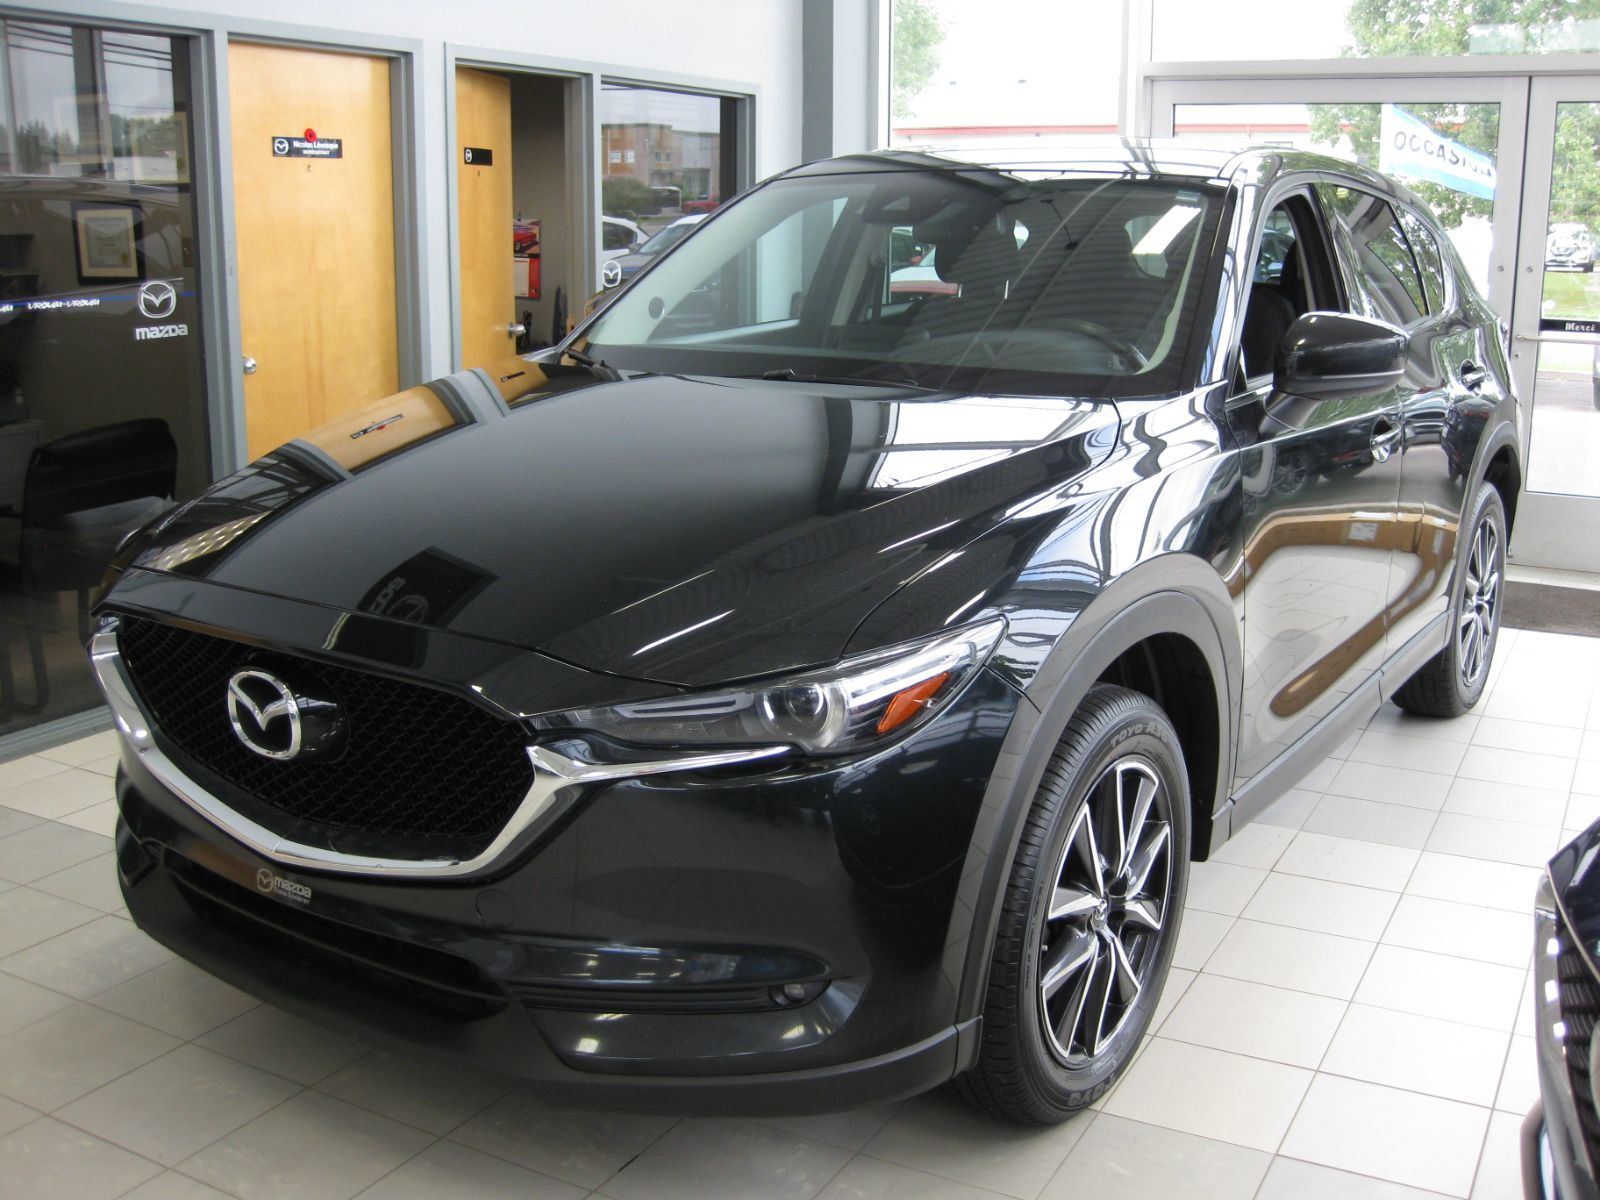 Mazda Trois Rivieres Pre Owned 17 Mazda Cx 5 Gt Cuir Toit Navigation Bose For Sale